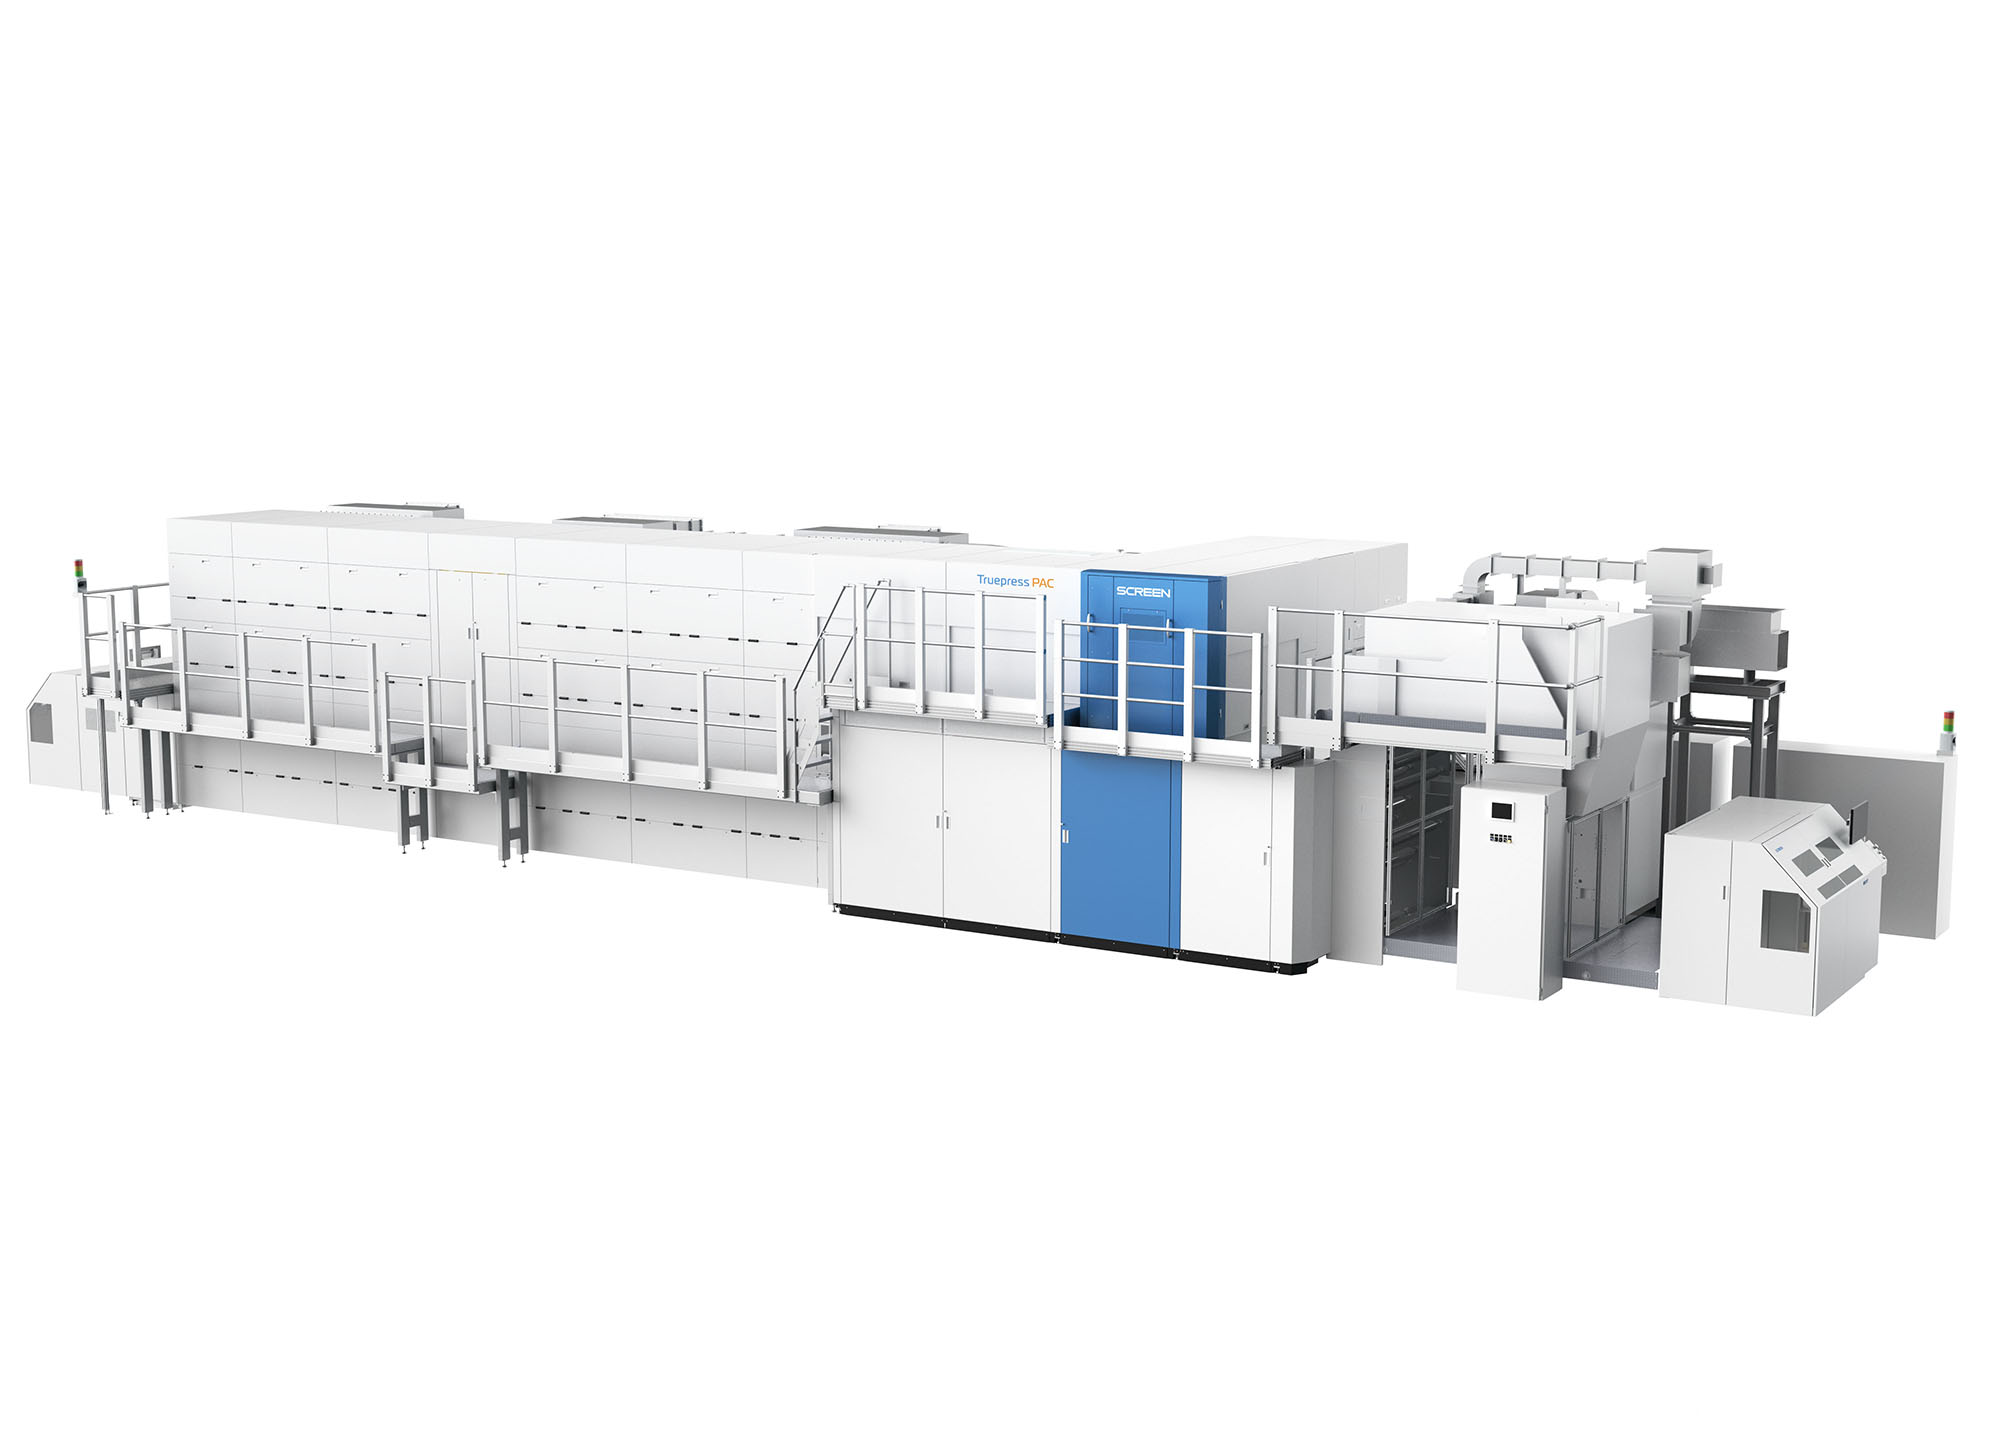 Image from SCREEN Releases High-speed, Water-based Inkjet System for Flexible Packaging